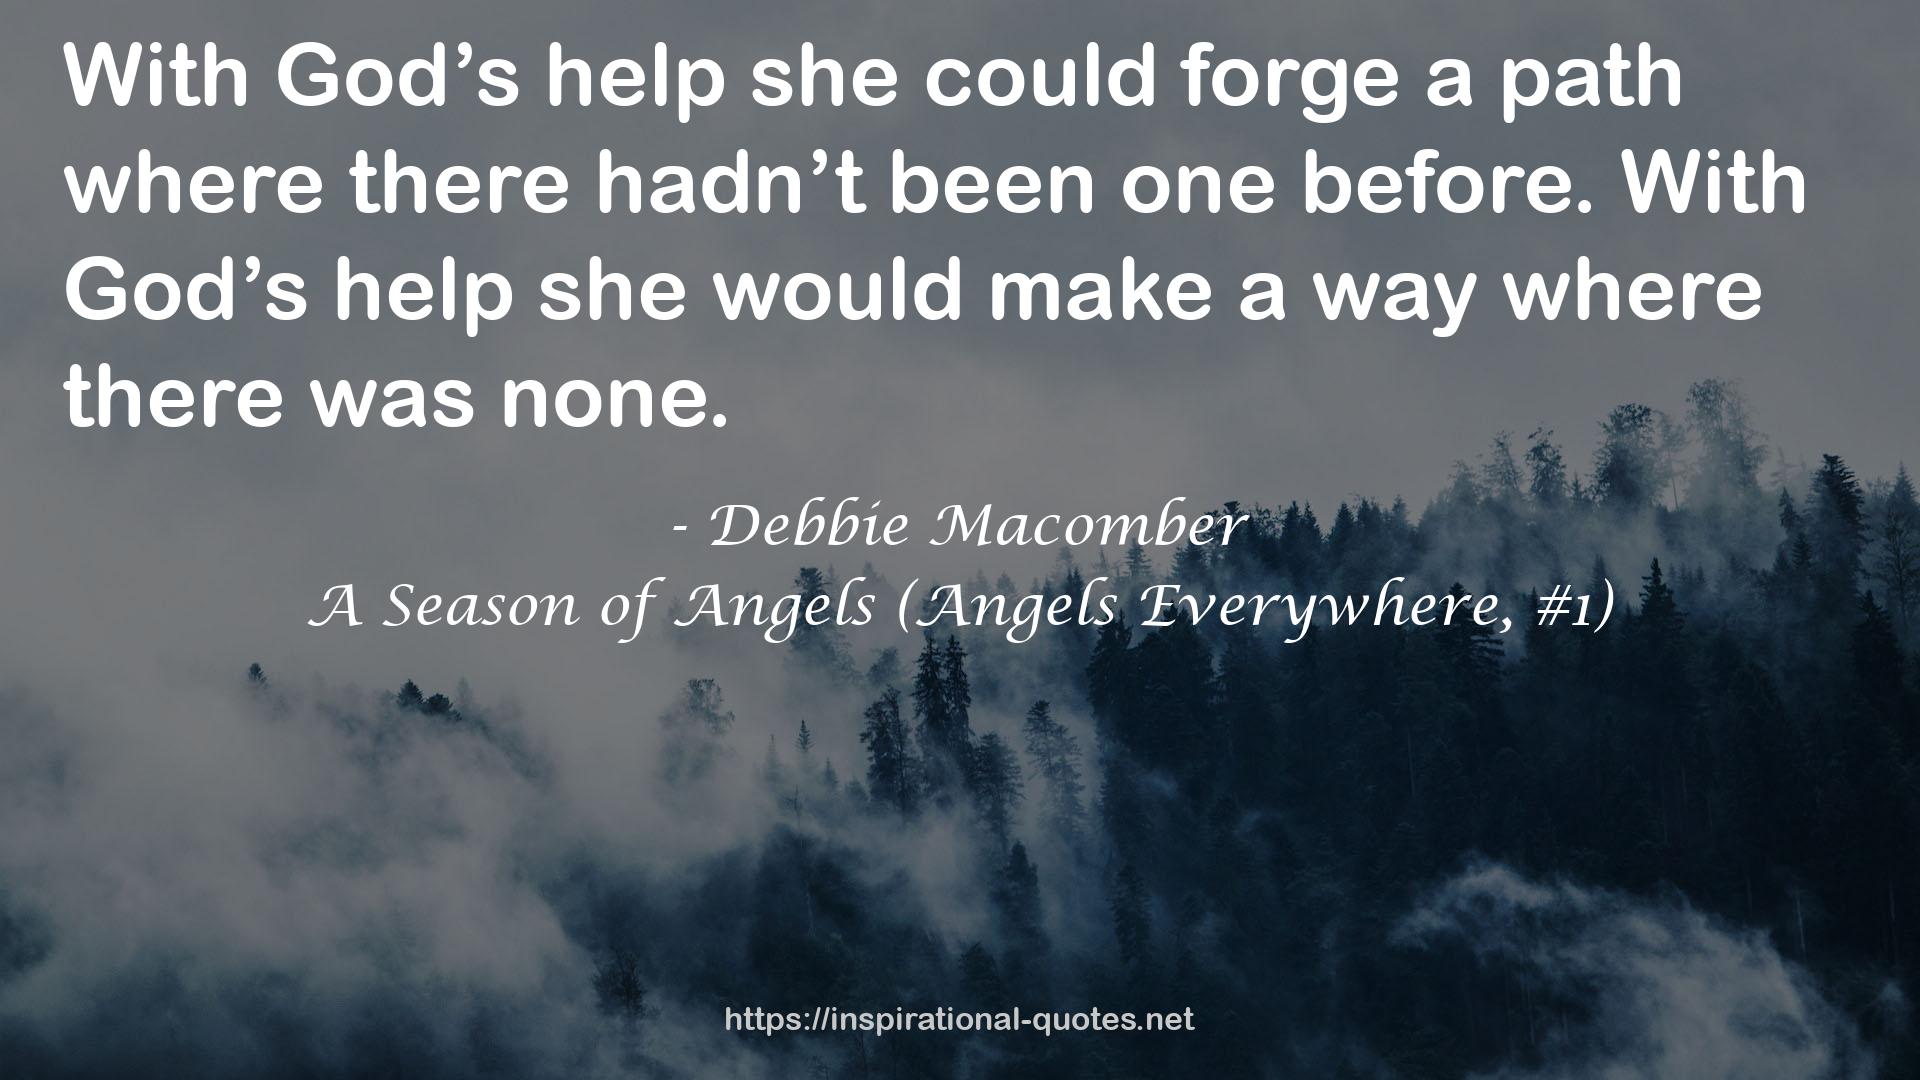 A Season of Angels (Angels Everywhere, #1) QUOTES